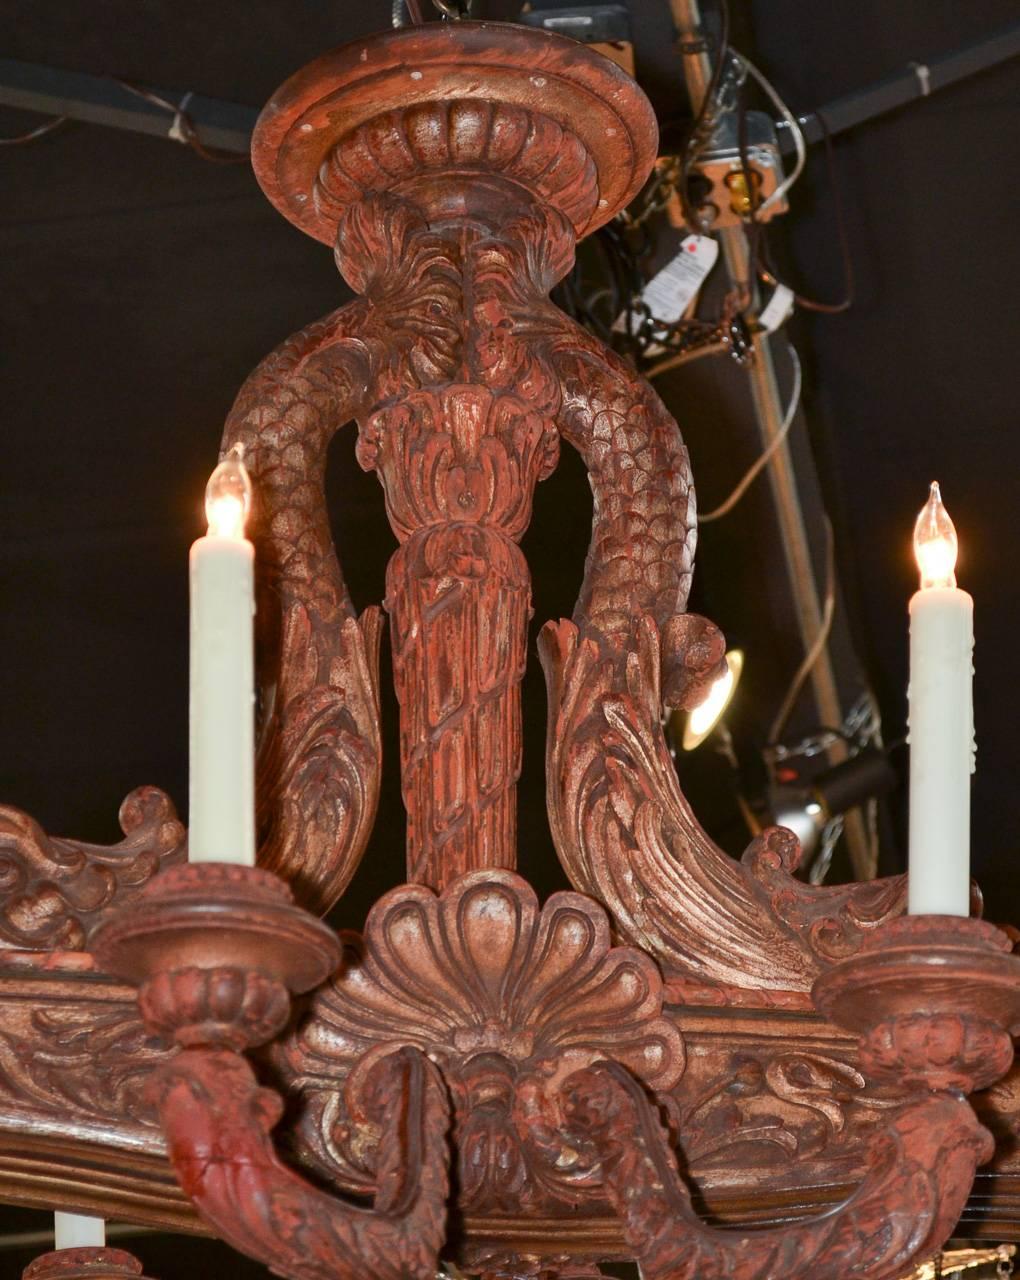 Wonderful 19th century Italian carved ten-light chandelier. Having graceful curved arms, carved dolphin adornments, and a rich warm patina. Great for numerous designs!